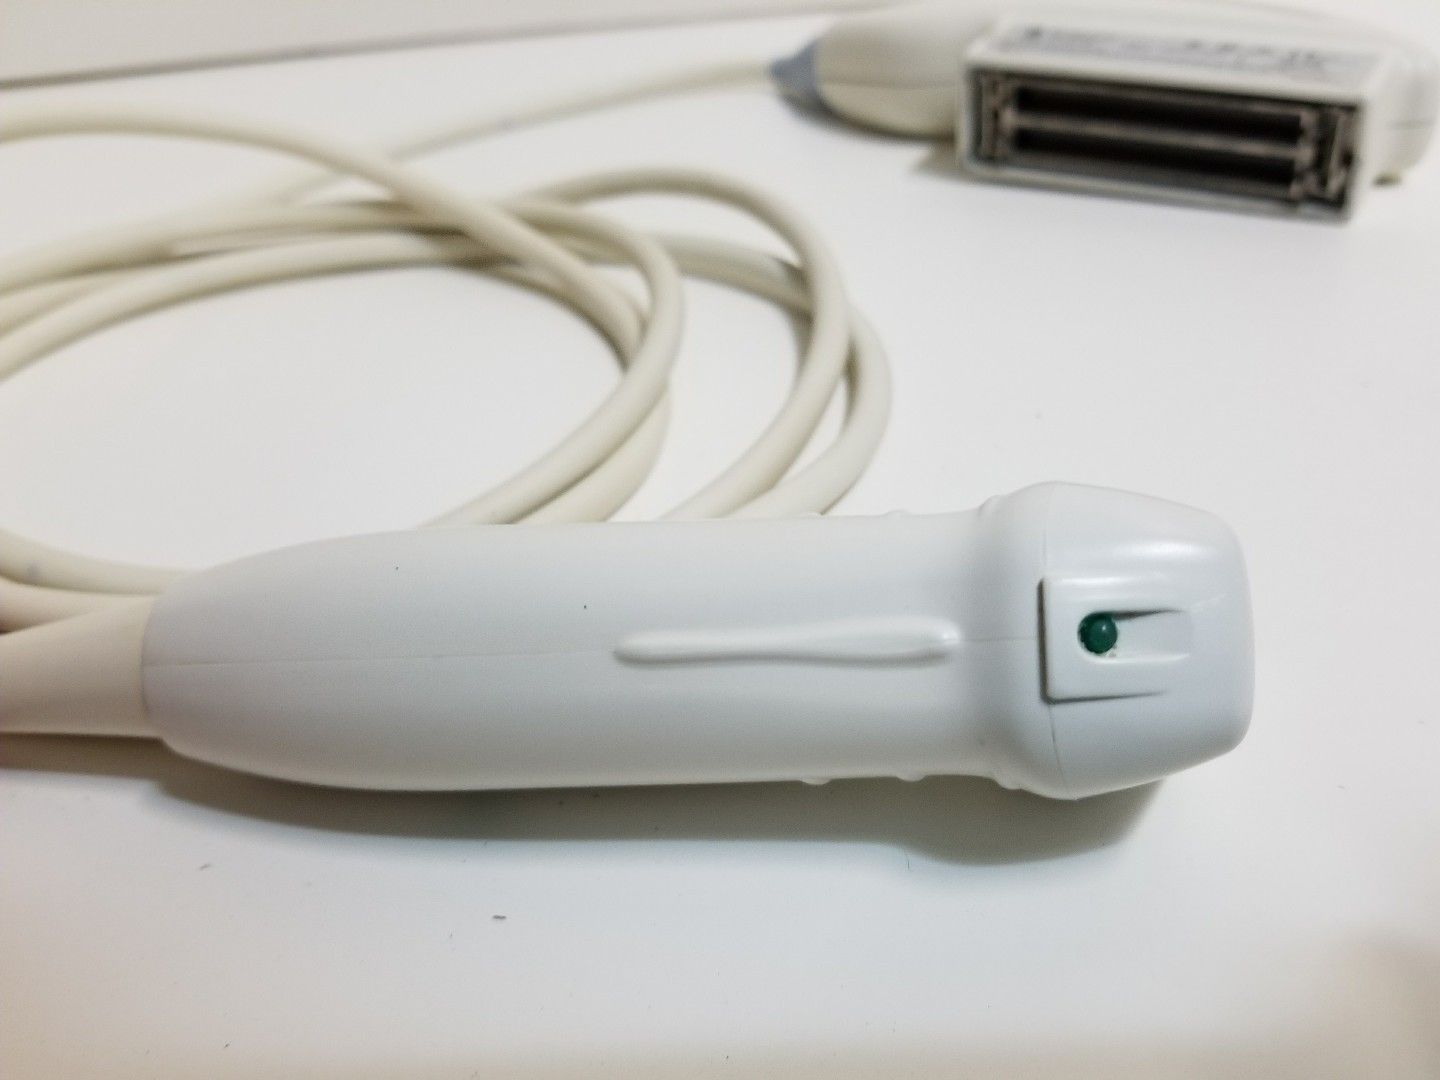 GE 3S-RS Ultrasound Transducer / Probe (Ref: 2355686) - Checked DIAGNOSTIC ULTRASOUND MACHINES FOR SALE